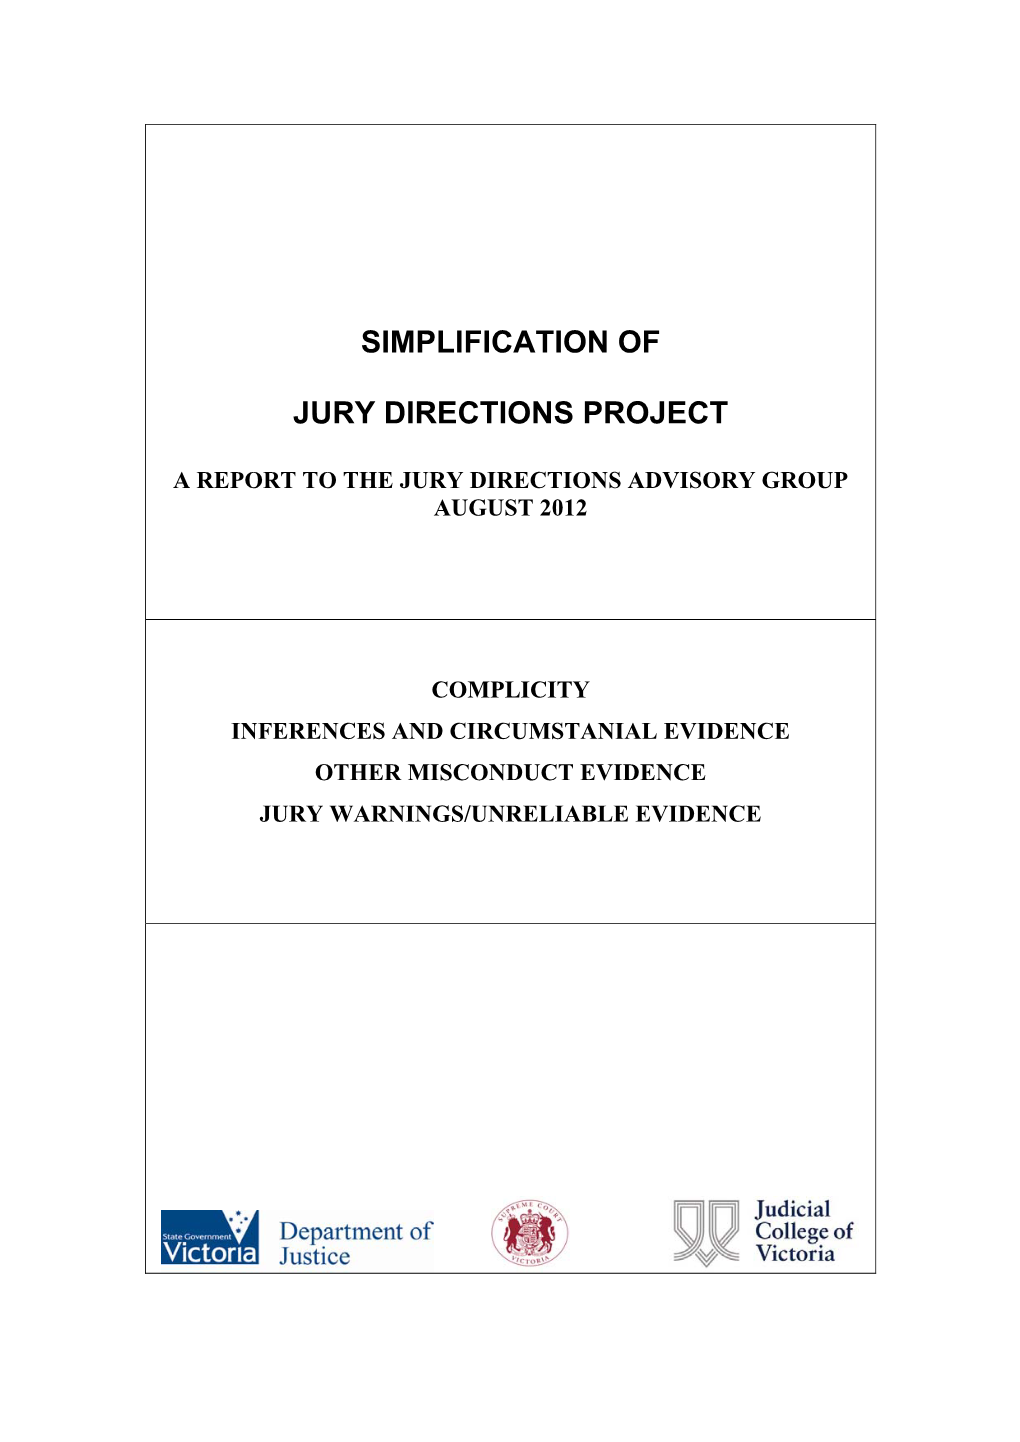 Simplification of Jury Directions Project Report